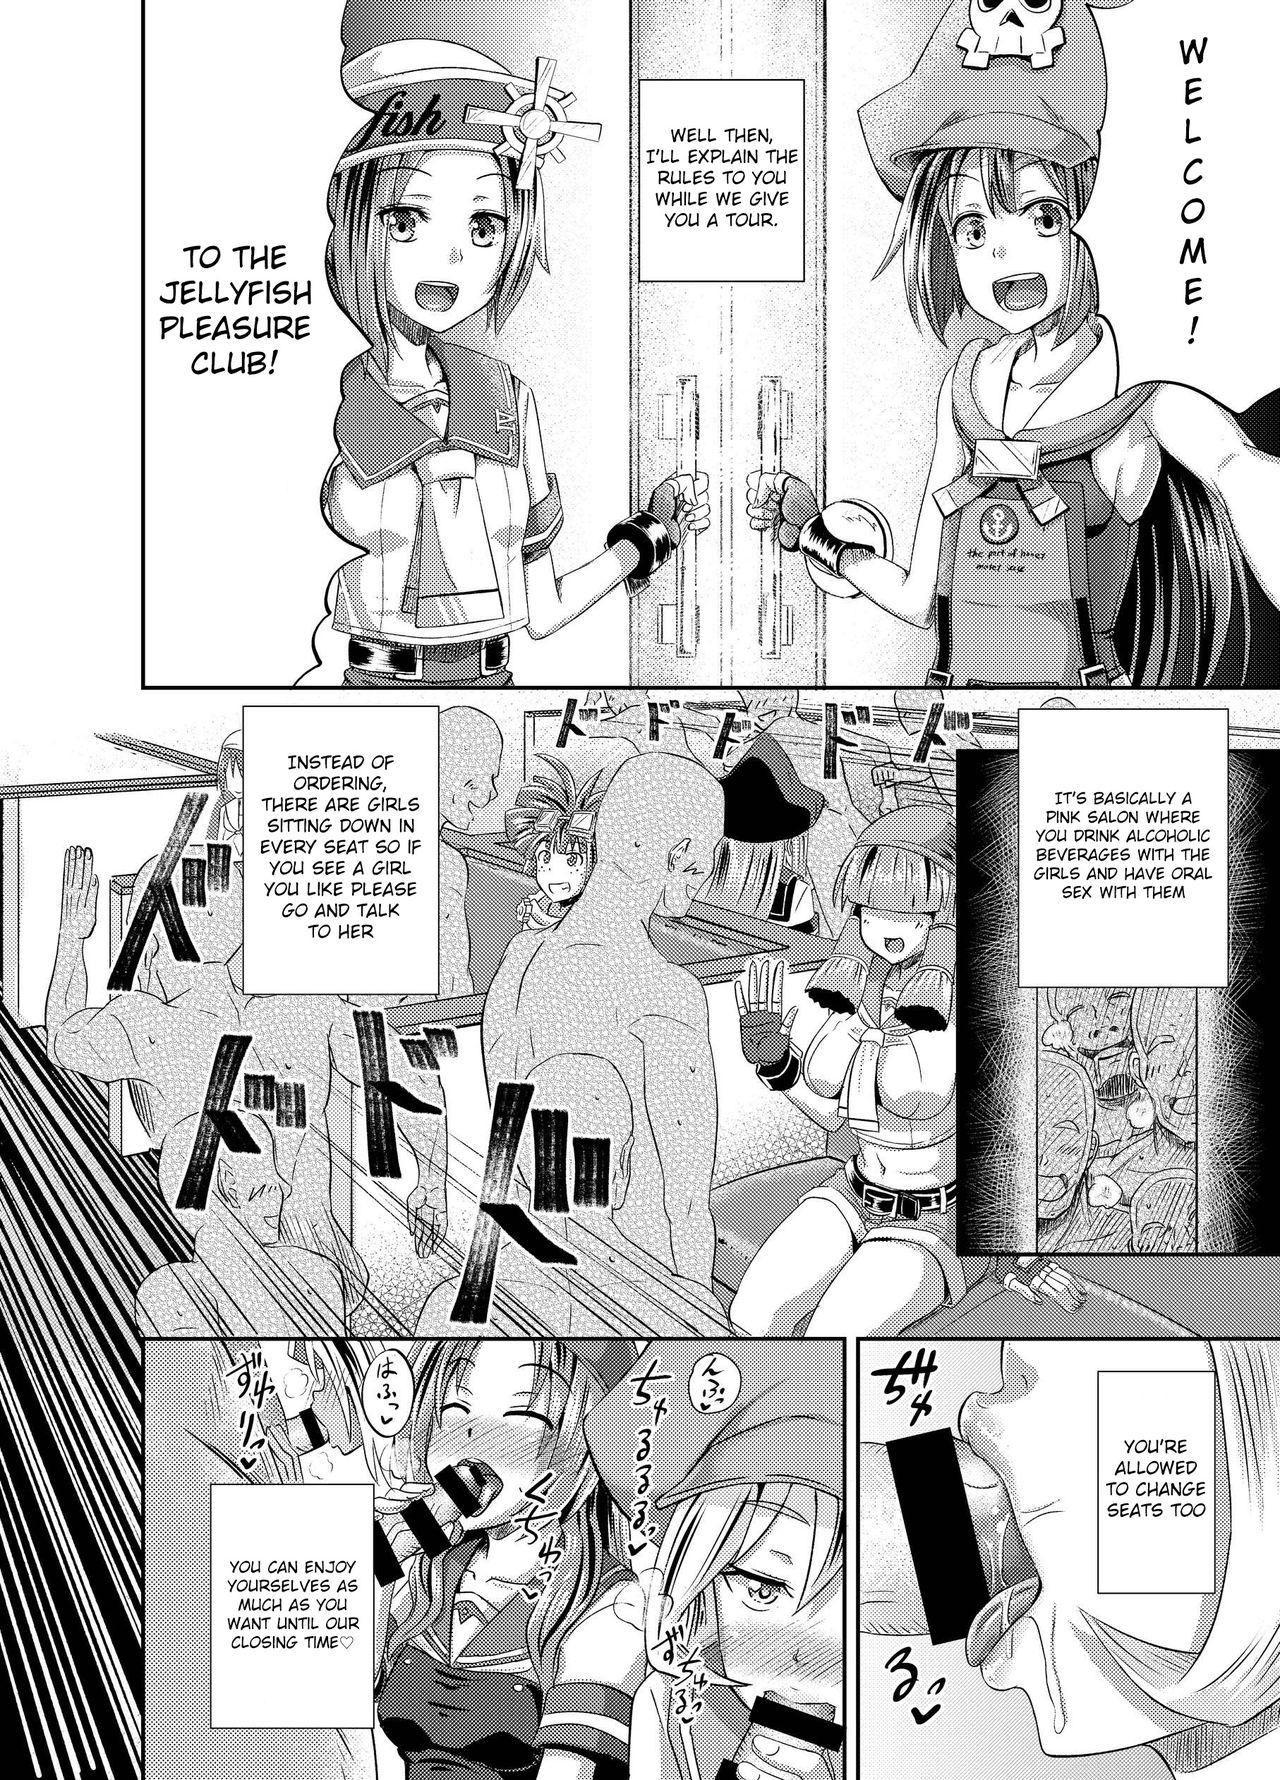 Penis Sucking Jellyfish Kaizokudan e Youkoso! | Welcome to The Jellyfish Pleasure Club! - Guilty gear Spanking - Page 3